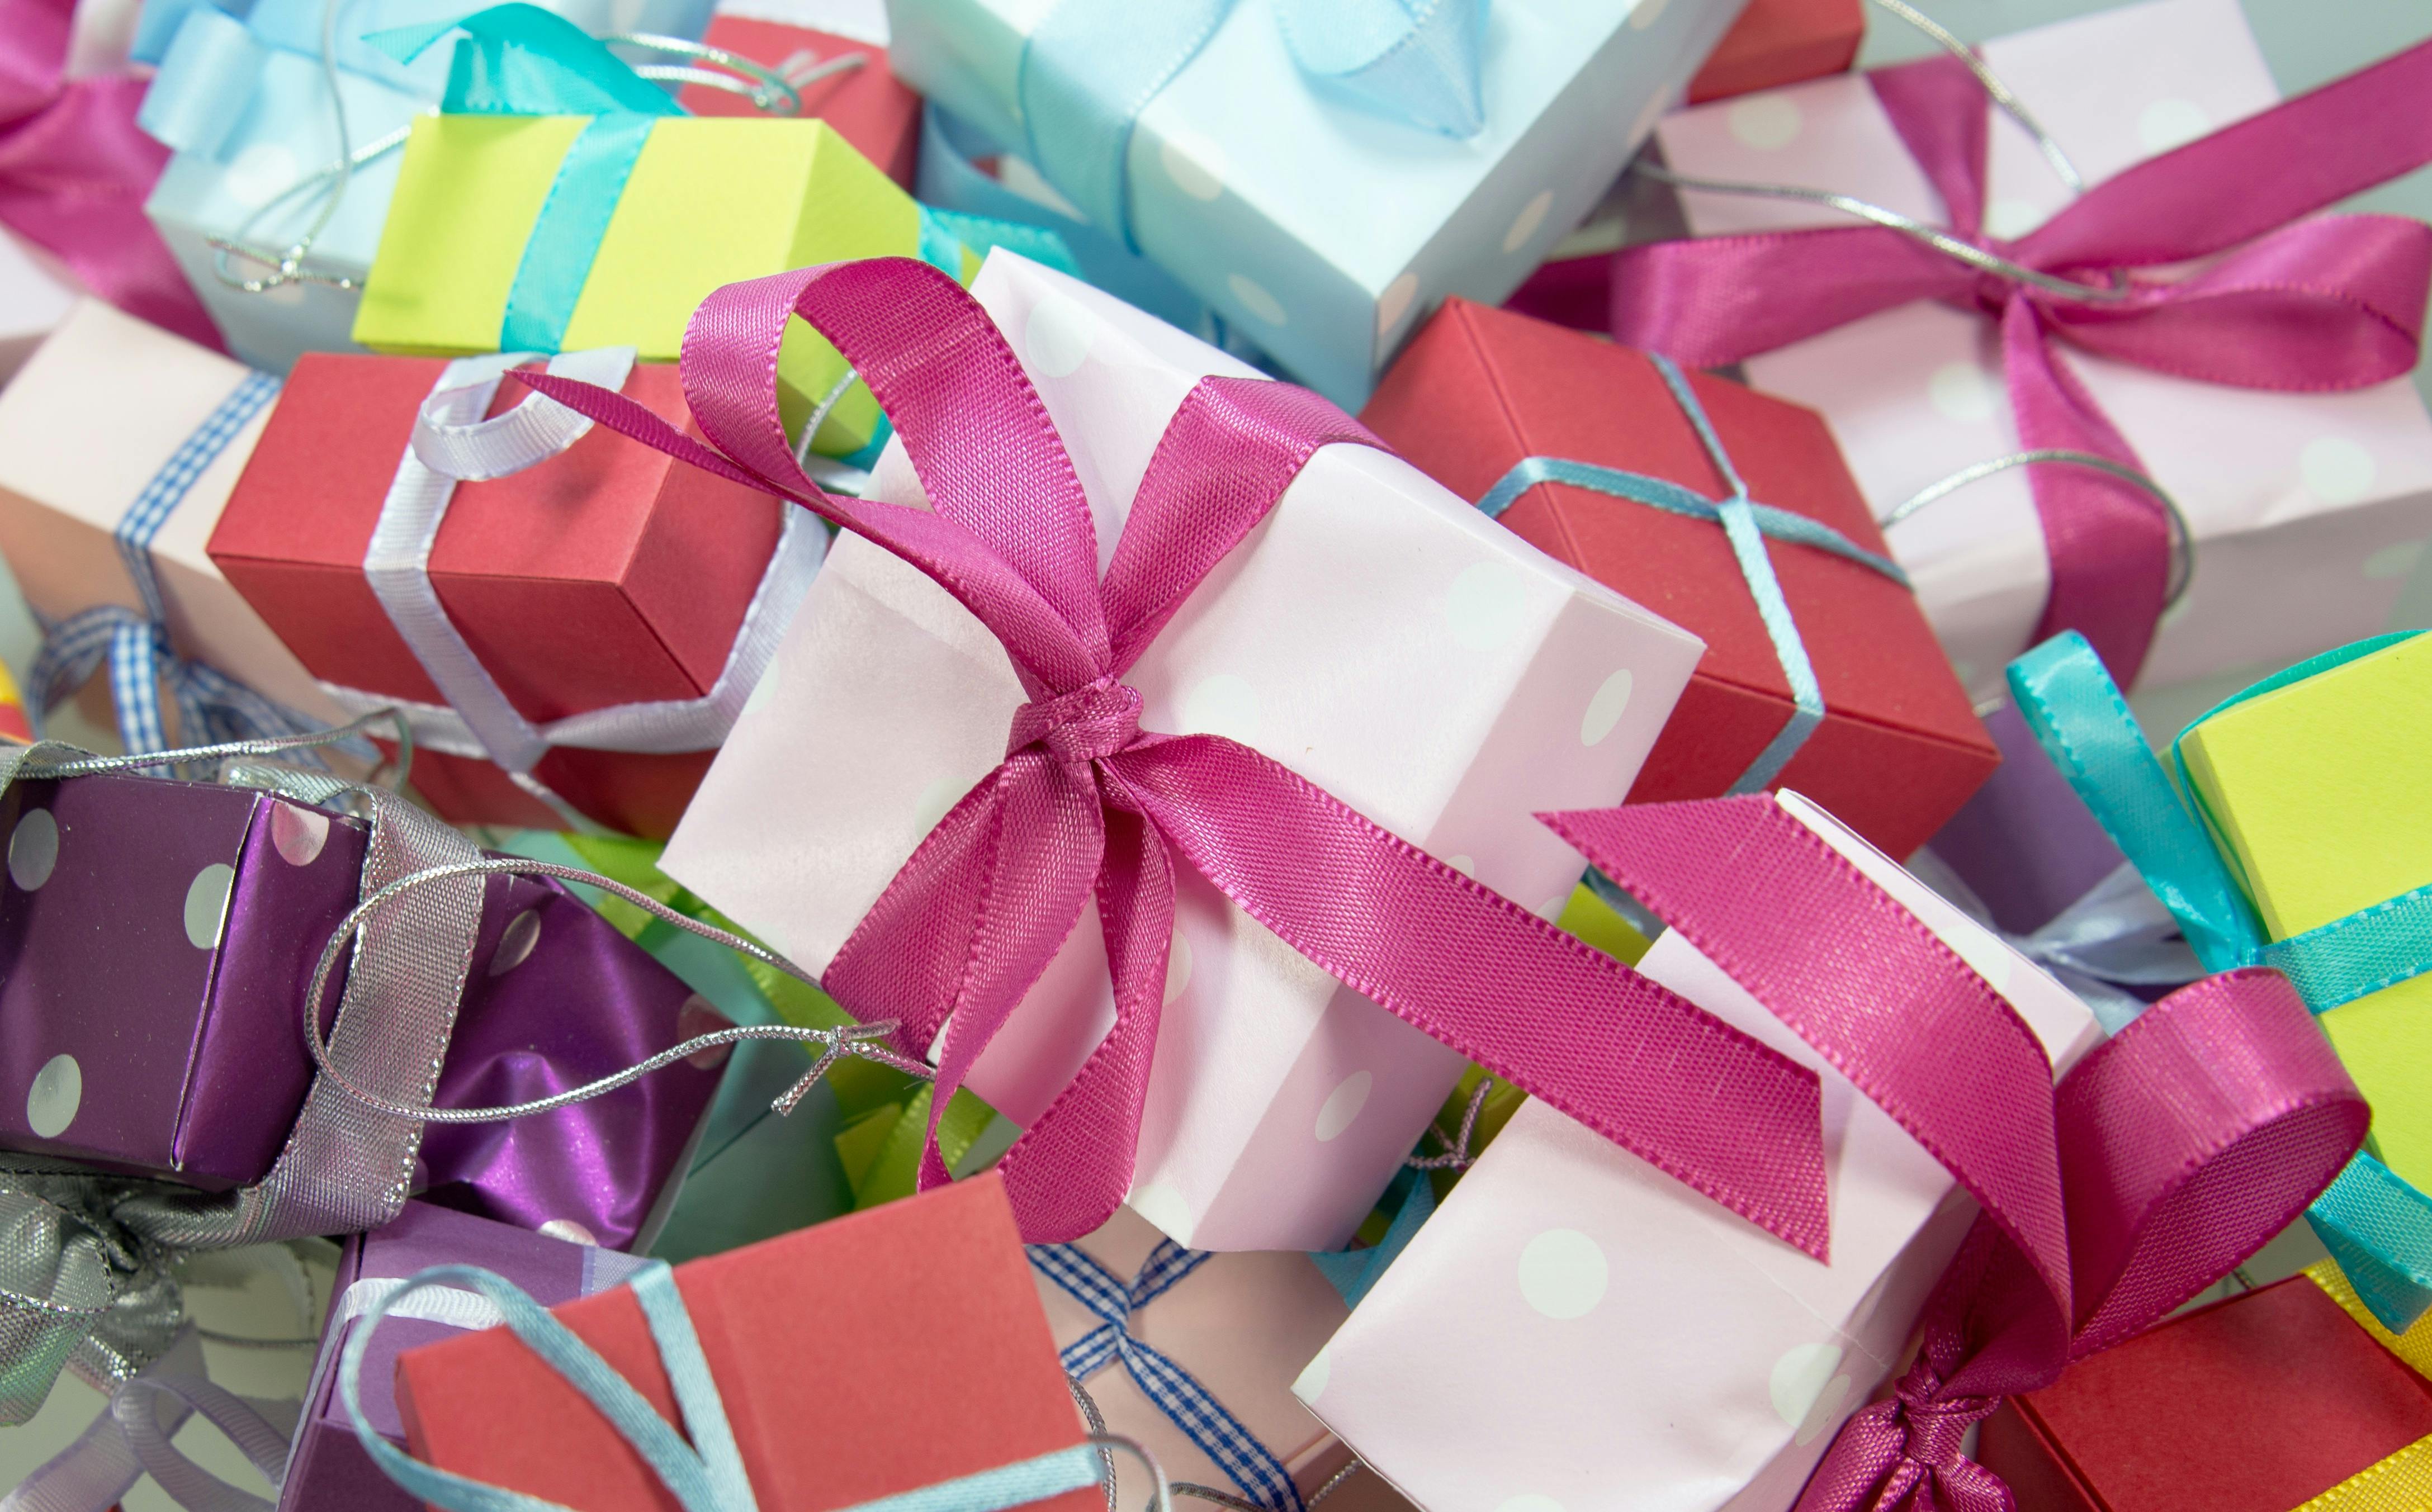 750+ Gift Box Pictures  Download Free Images & Stock Photos on